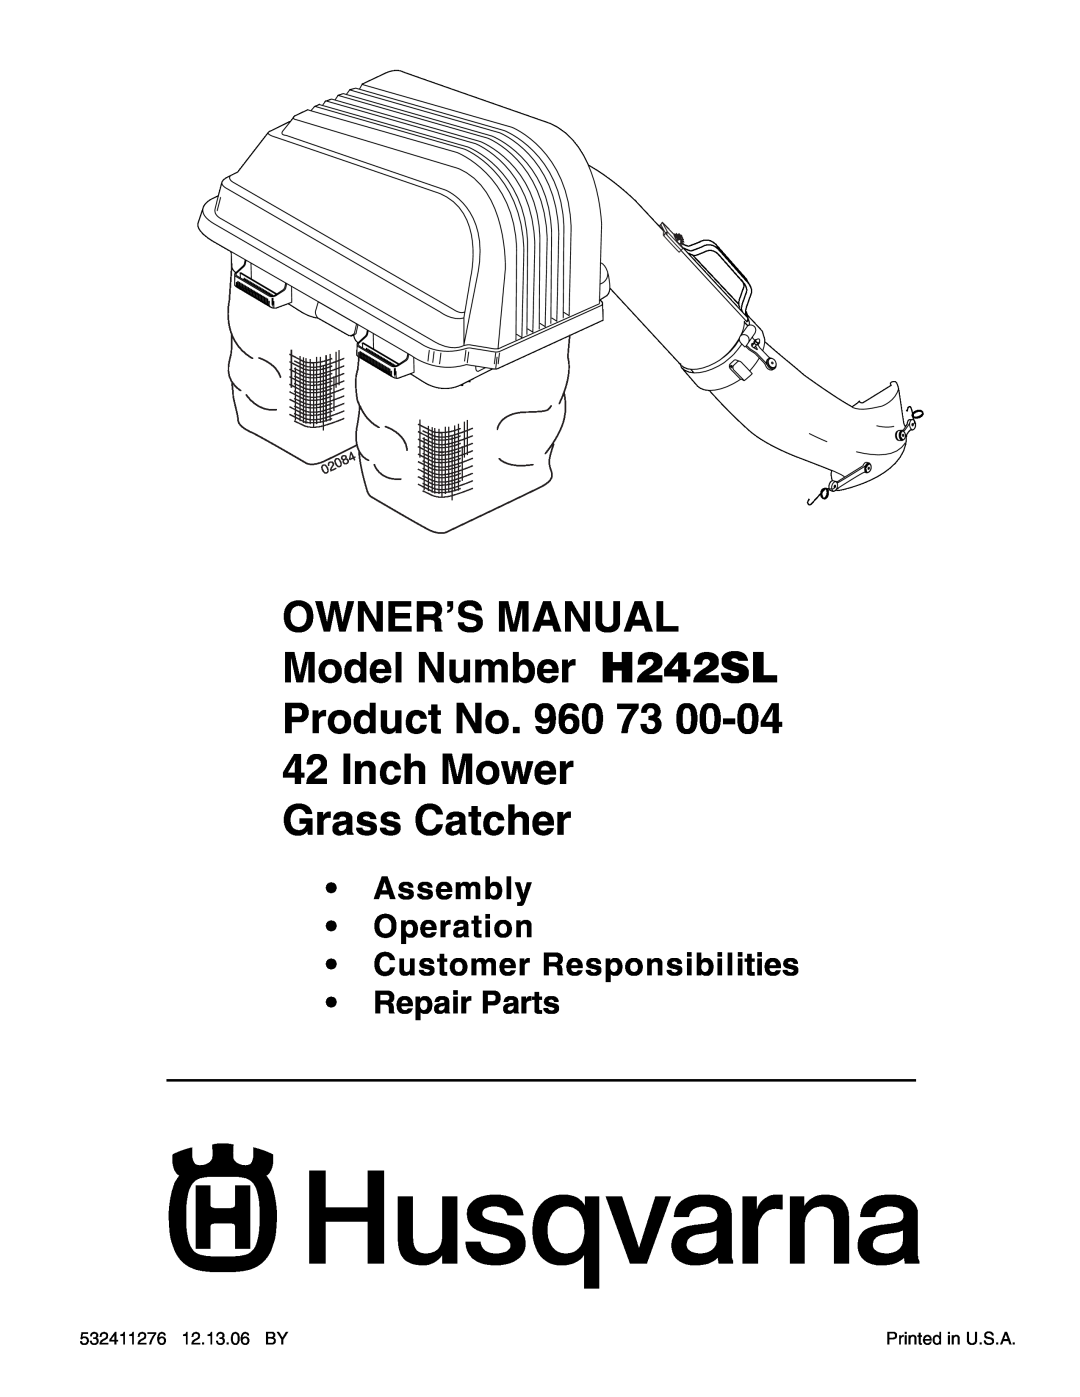 Husqvarna H242SL owner manual Product No. 960 73 42 Inch Mower Grass Catcher, Assembly Operation Customer Responsibilities 